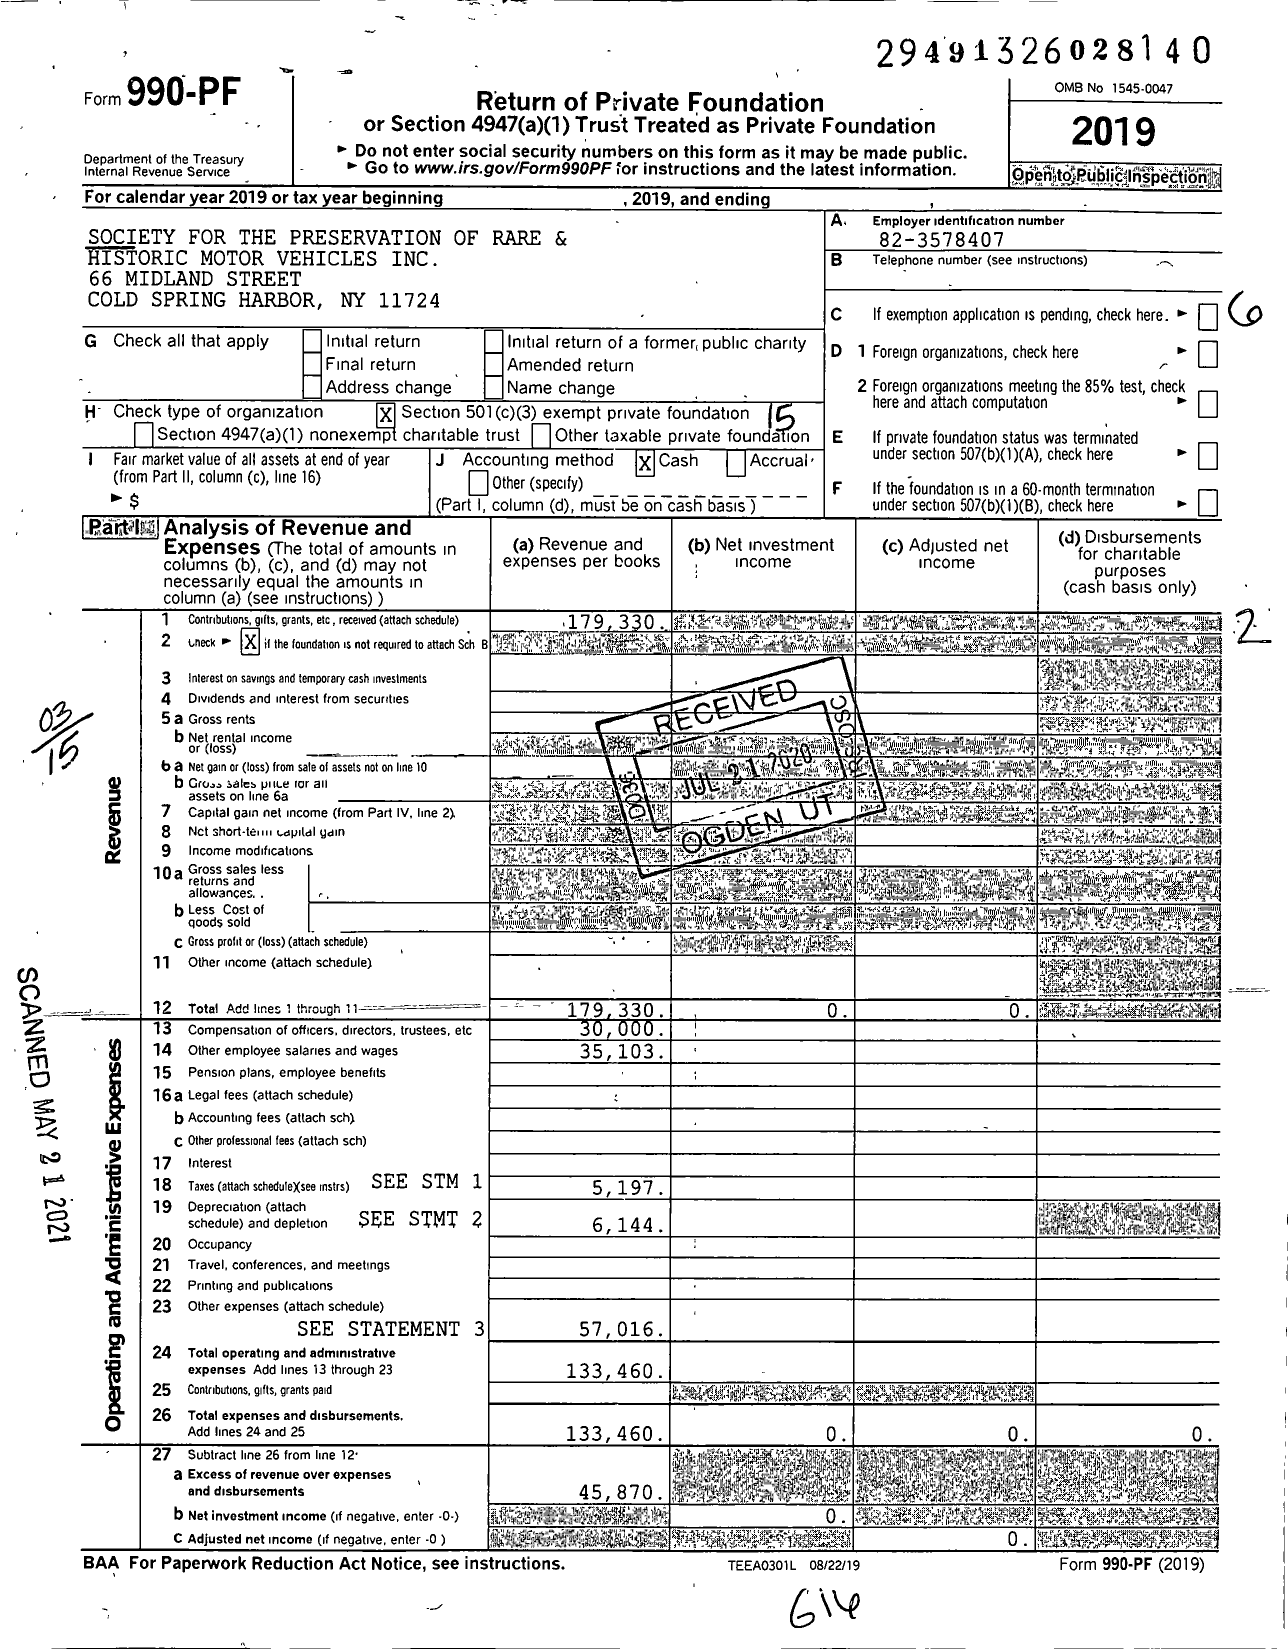 Image of first page of 2019 Form 990PF for Society for the Preservation of Rare and Historic Motor Vehicles